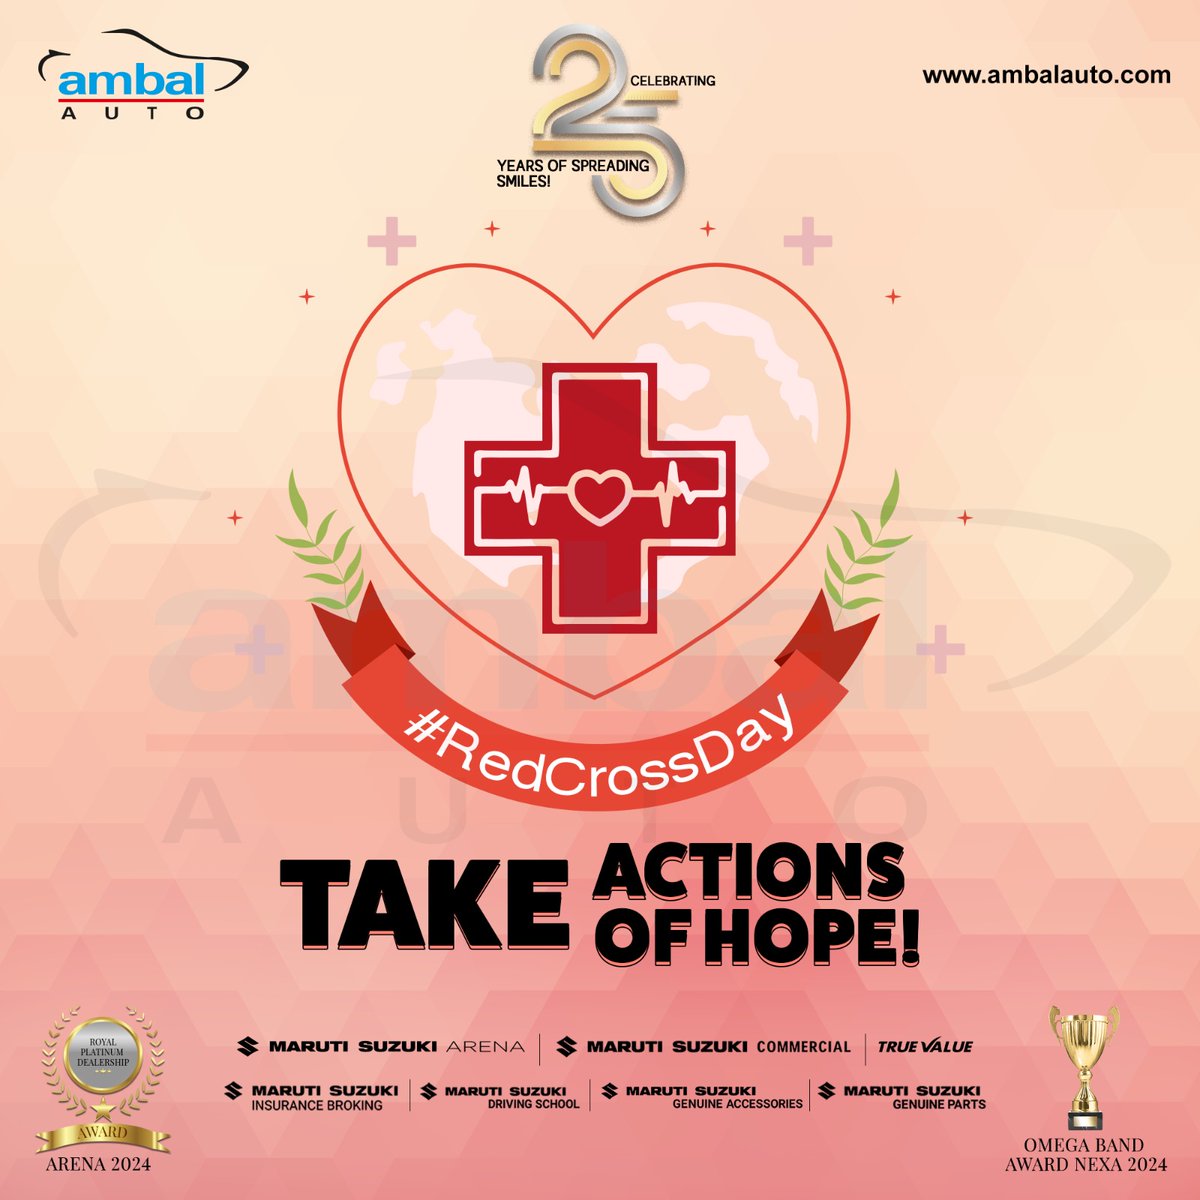 On Red Cross Day, we salute the extraordinary bravery and kindness of those who rush to aid others in times of crisis. Their dedication to serving humanity inspires us all to embrace the power of empathy and solidarity.

#AmbalAuto #Nexa #Arena #TrueValue #RedCrossDay2024